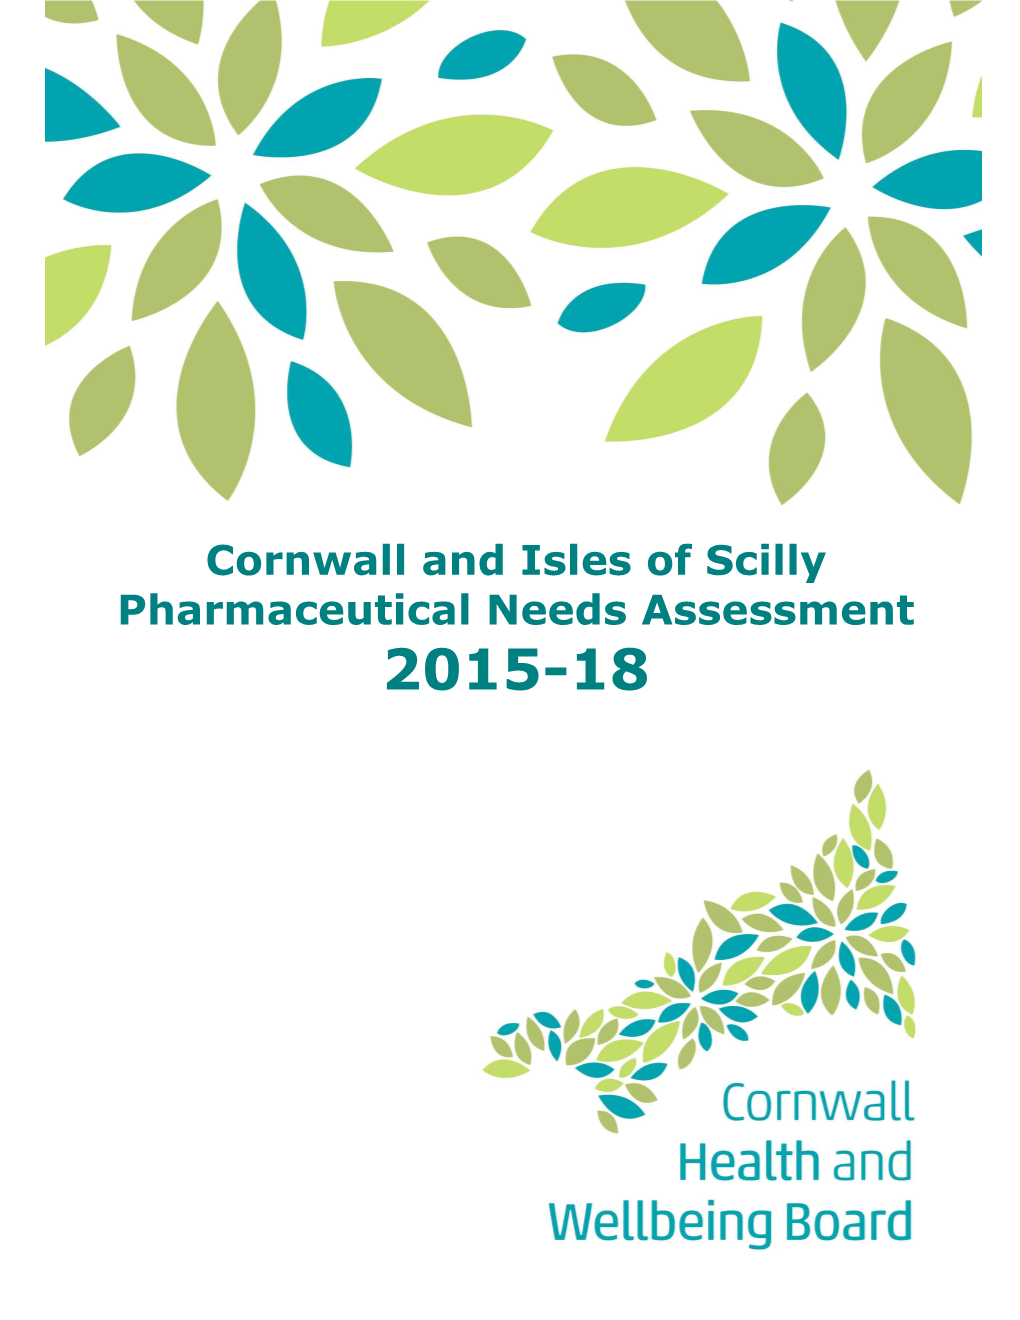 Cornwall and Isles of Scilly Pharmaceutical Needs Assessment 2015-18